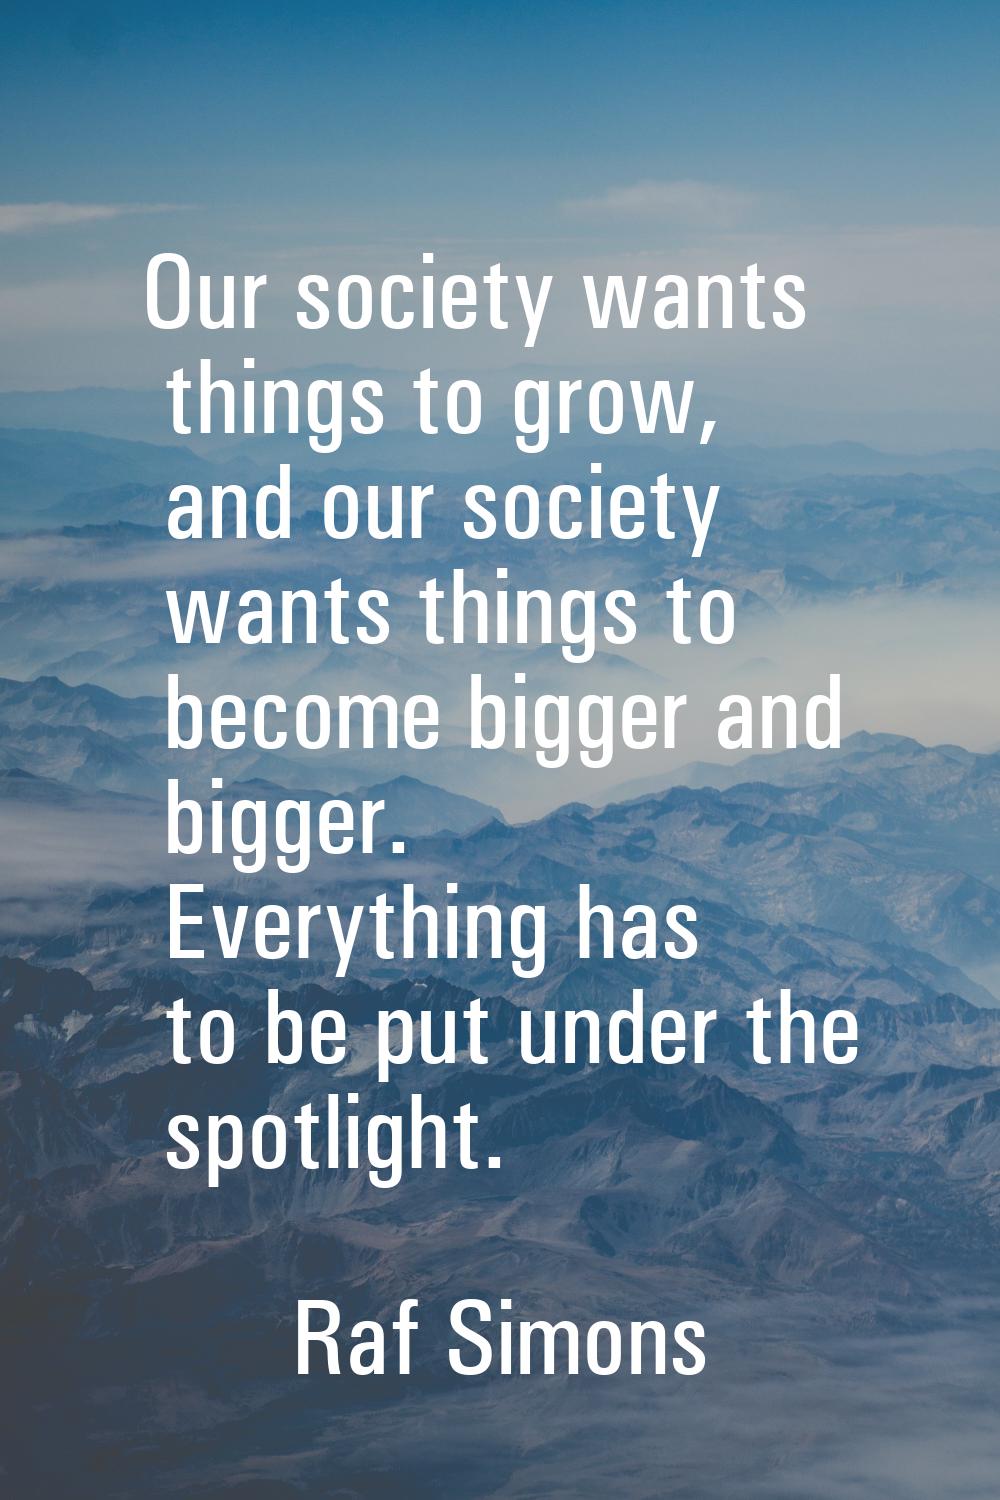 Our society wants things to grow, and our society wants things to become bigger and bigger. Everyth